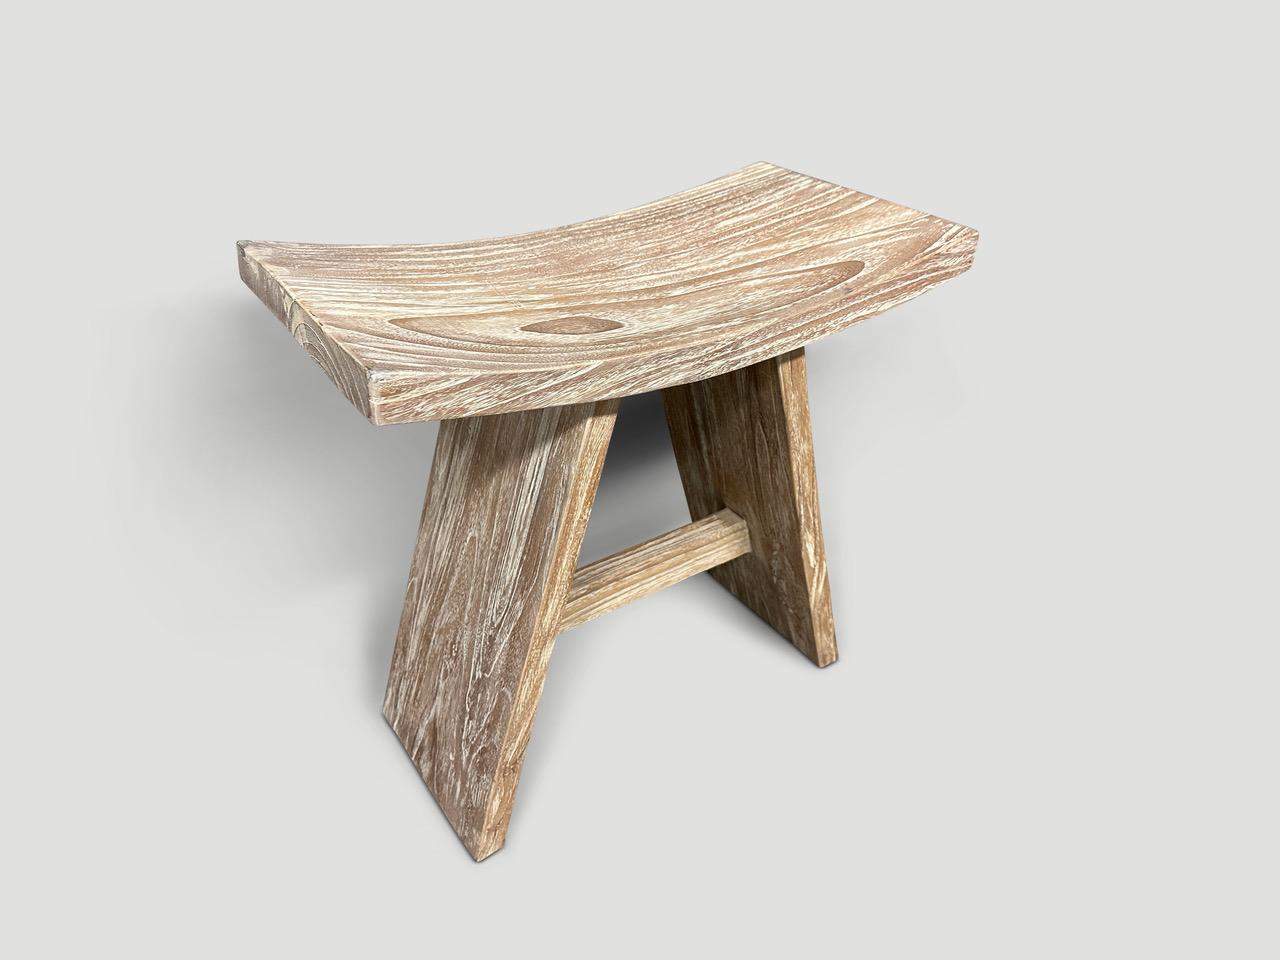 Sleek minimalist bench or stool hand made from a single slab of reclaimed teak wood with a cerused finish revealing the beautiful wood grain. We have a collection. The images and price reflect the one shown. Full dimensions; 19.5” wide x 10.5” deep